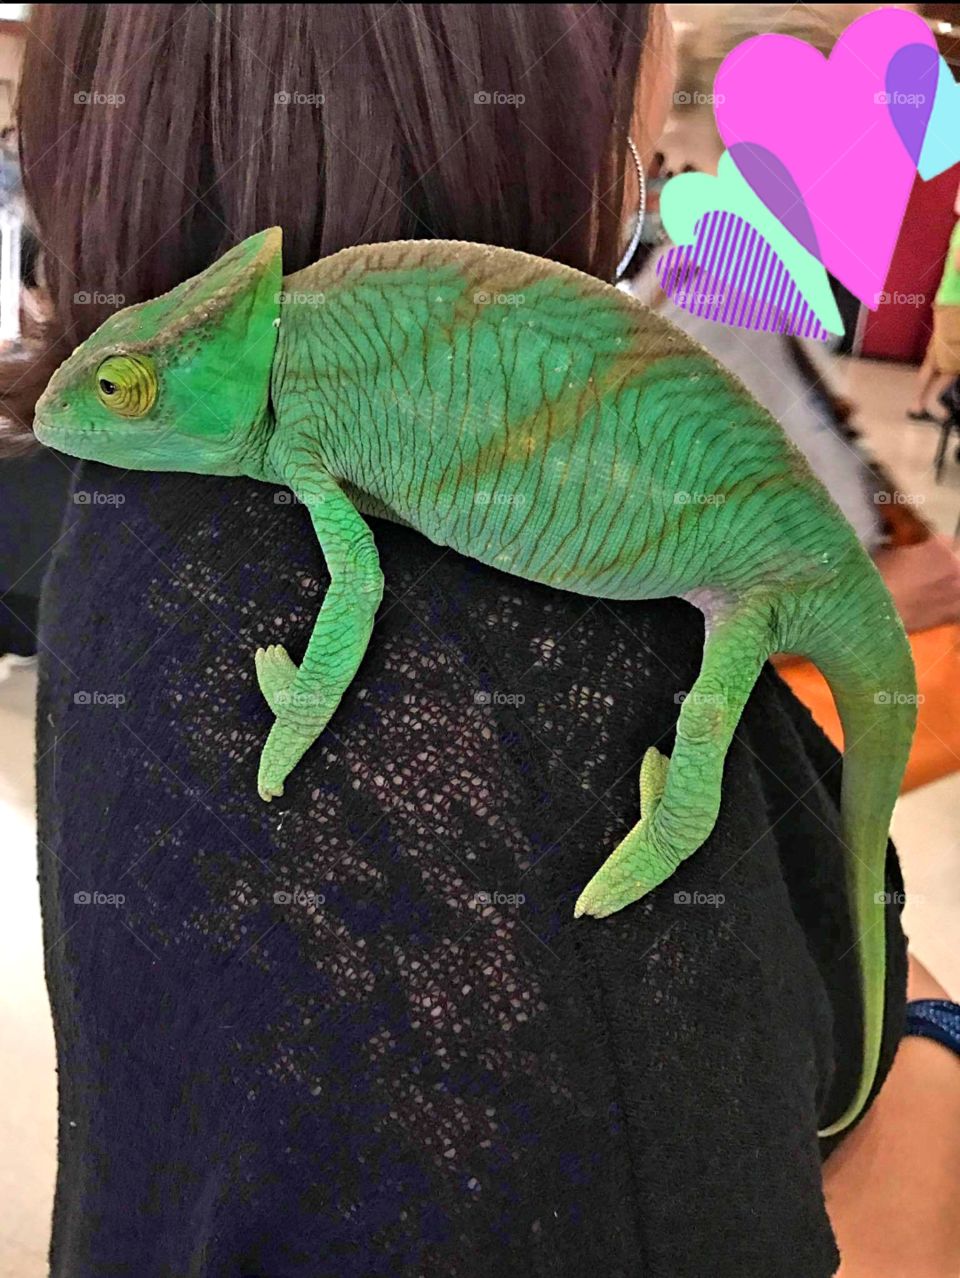 A unique beautiful creature, a chameleon from Madagascar!